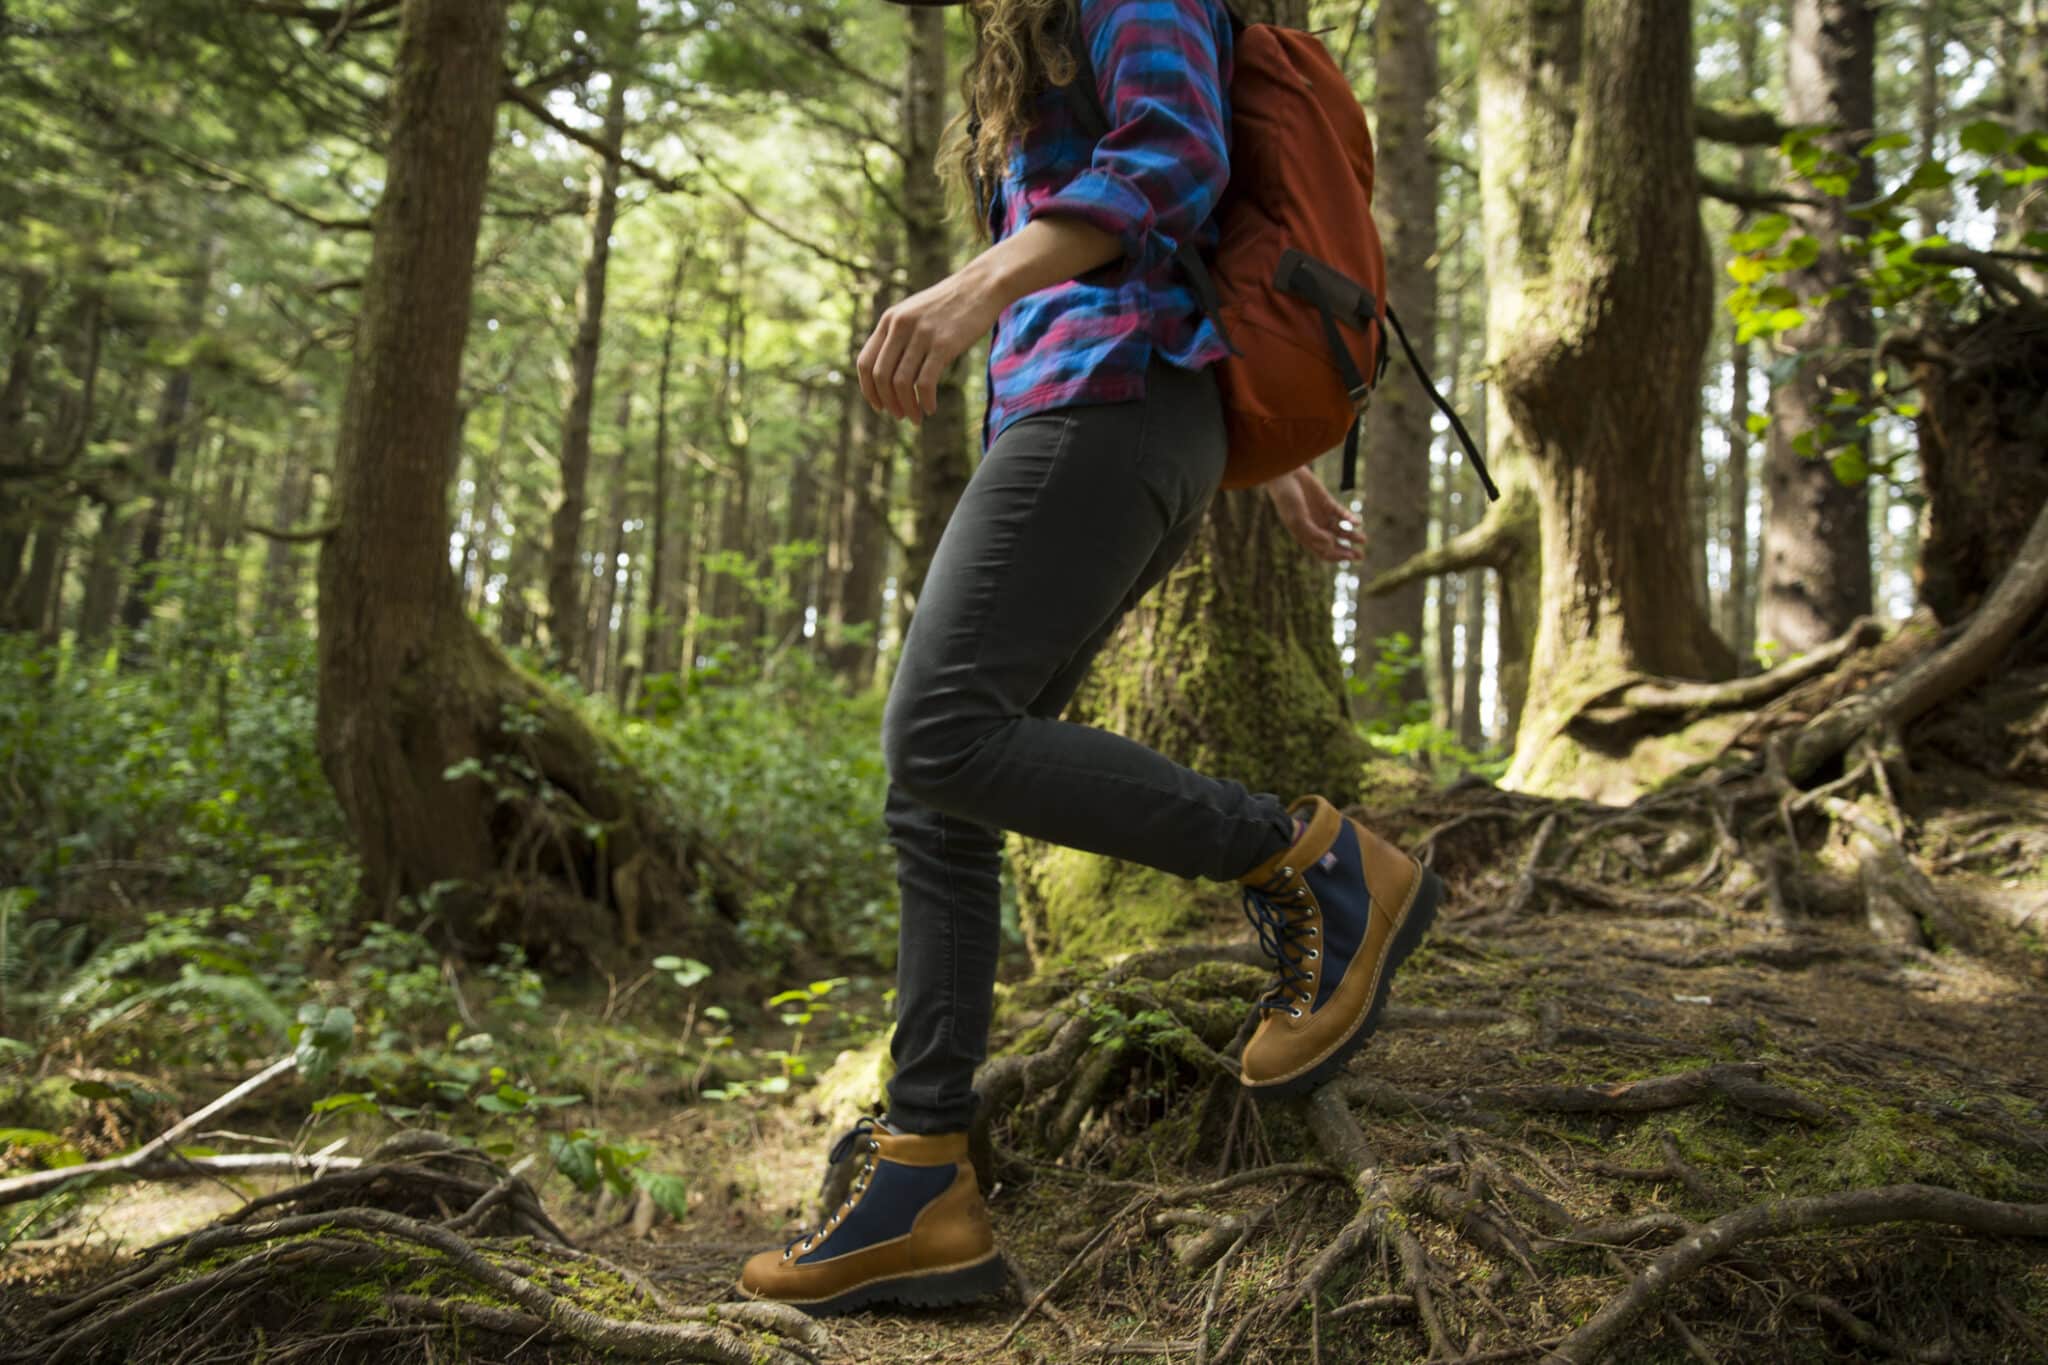 A woman hiking in a dense forest.